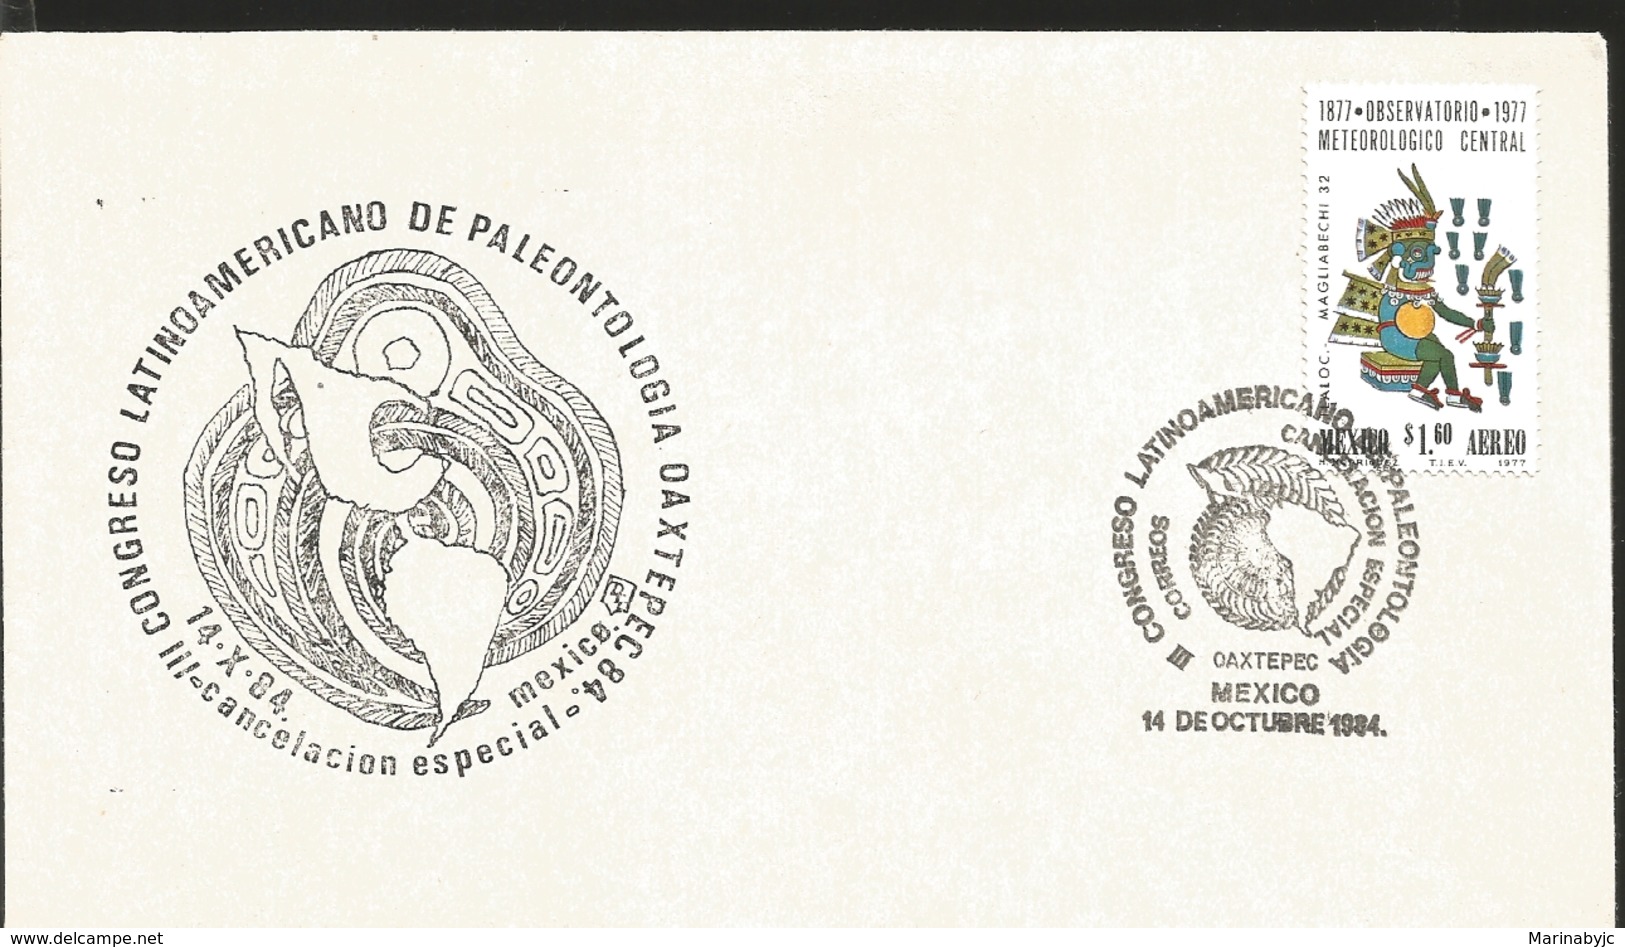 J) 1977 MEXICO, III LATIN AMERICAN CONGRESS OF PALEONTOLOGIA OAXTEPEC, CENTRAL METEOROLOGICAL OBSERVATORY, TLALOC, FDC - Mexico